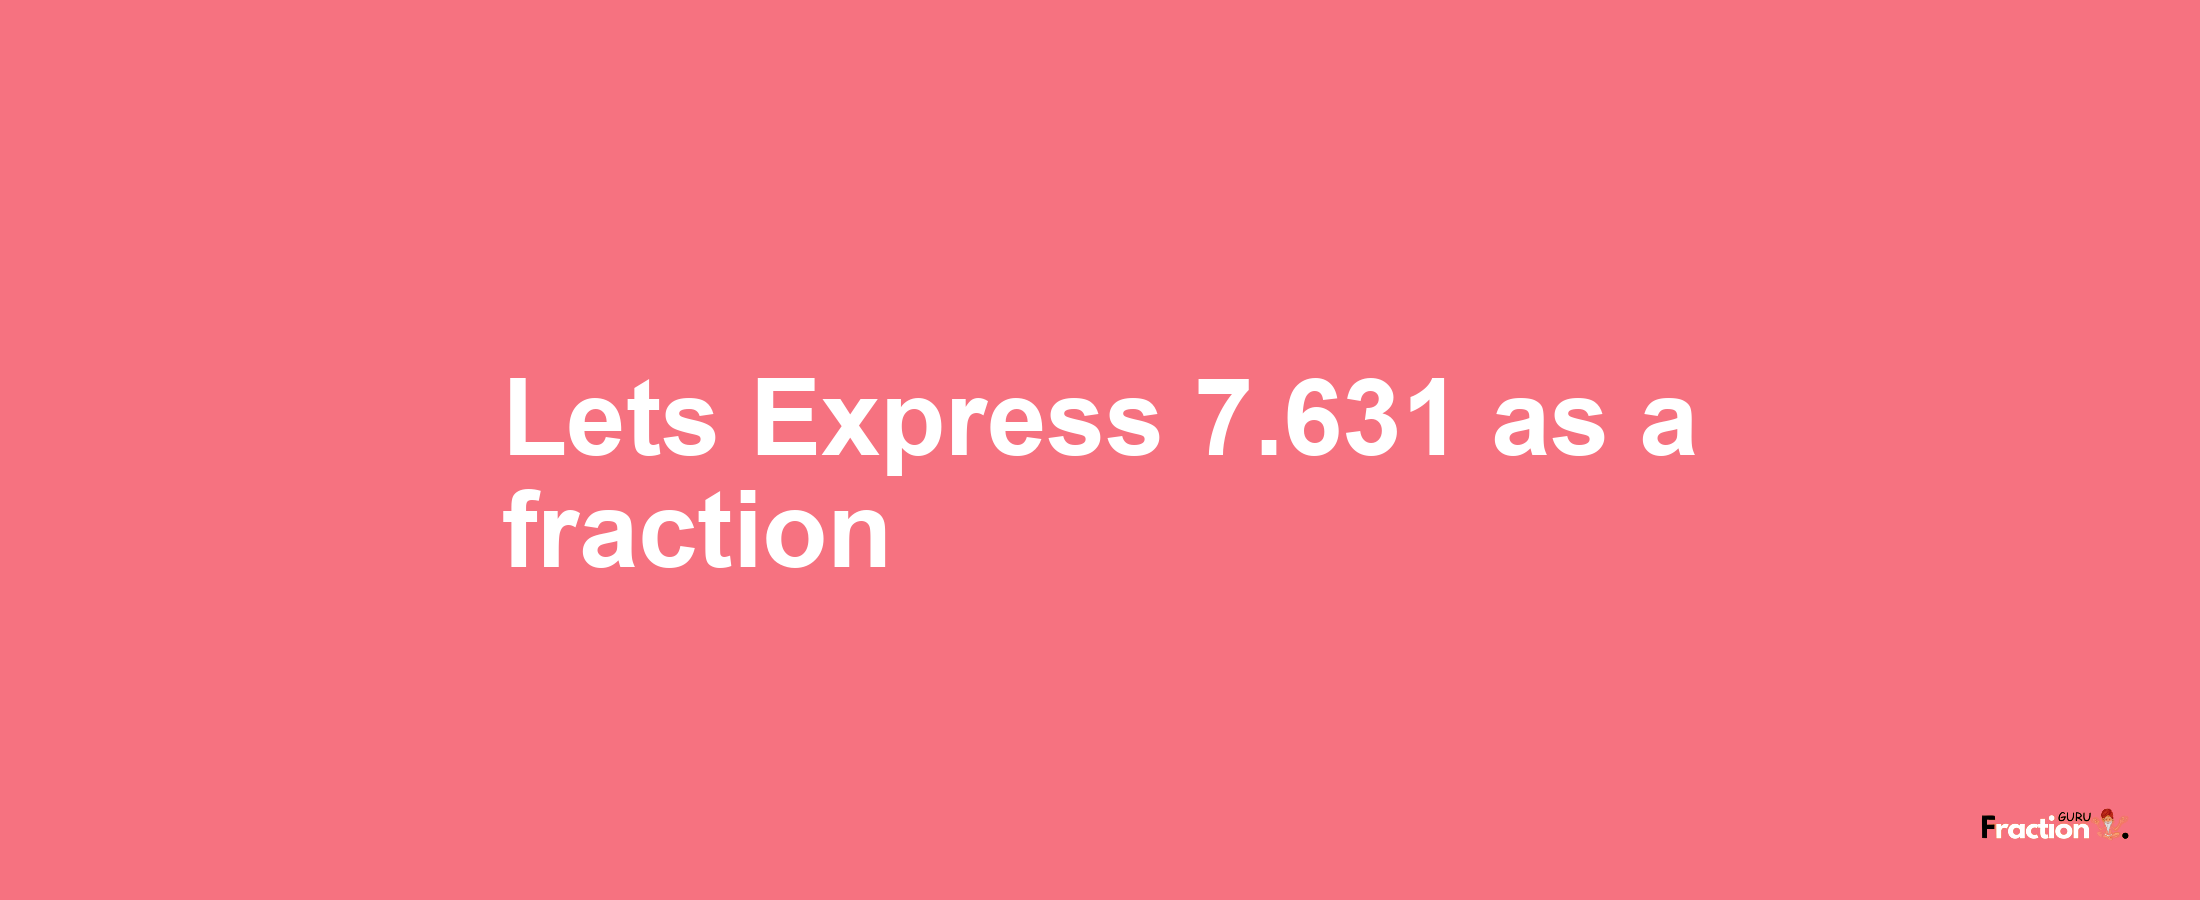 Lets Express 7.631 as afraction